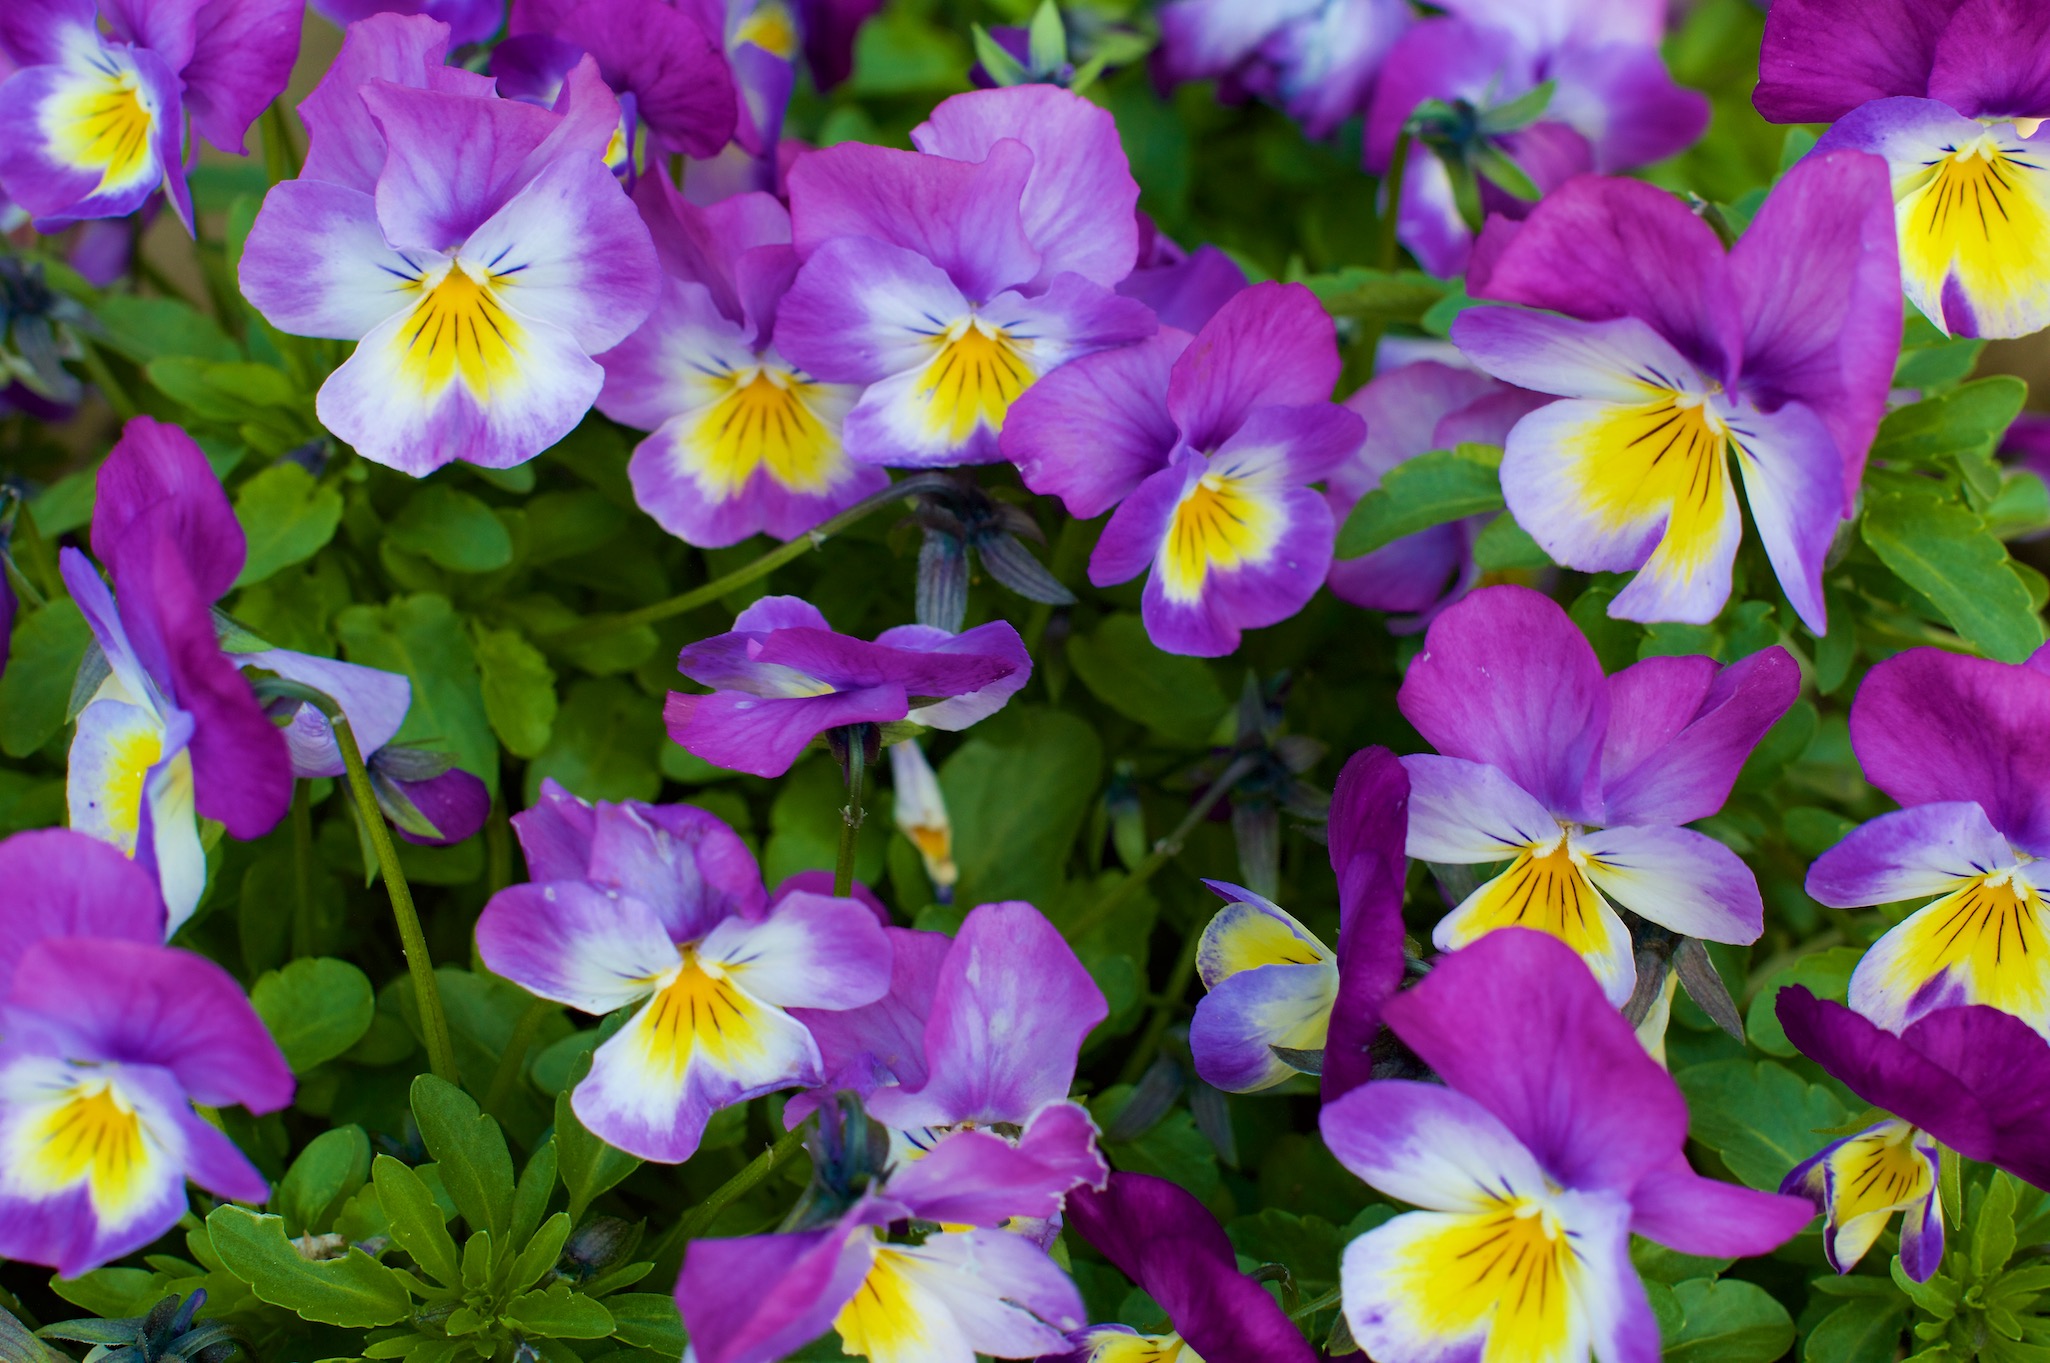 Purple and yellow pansies in Hell, Norway